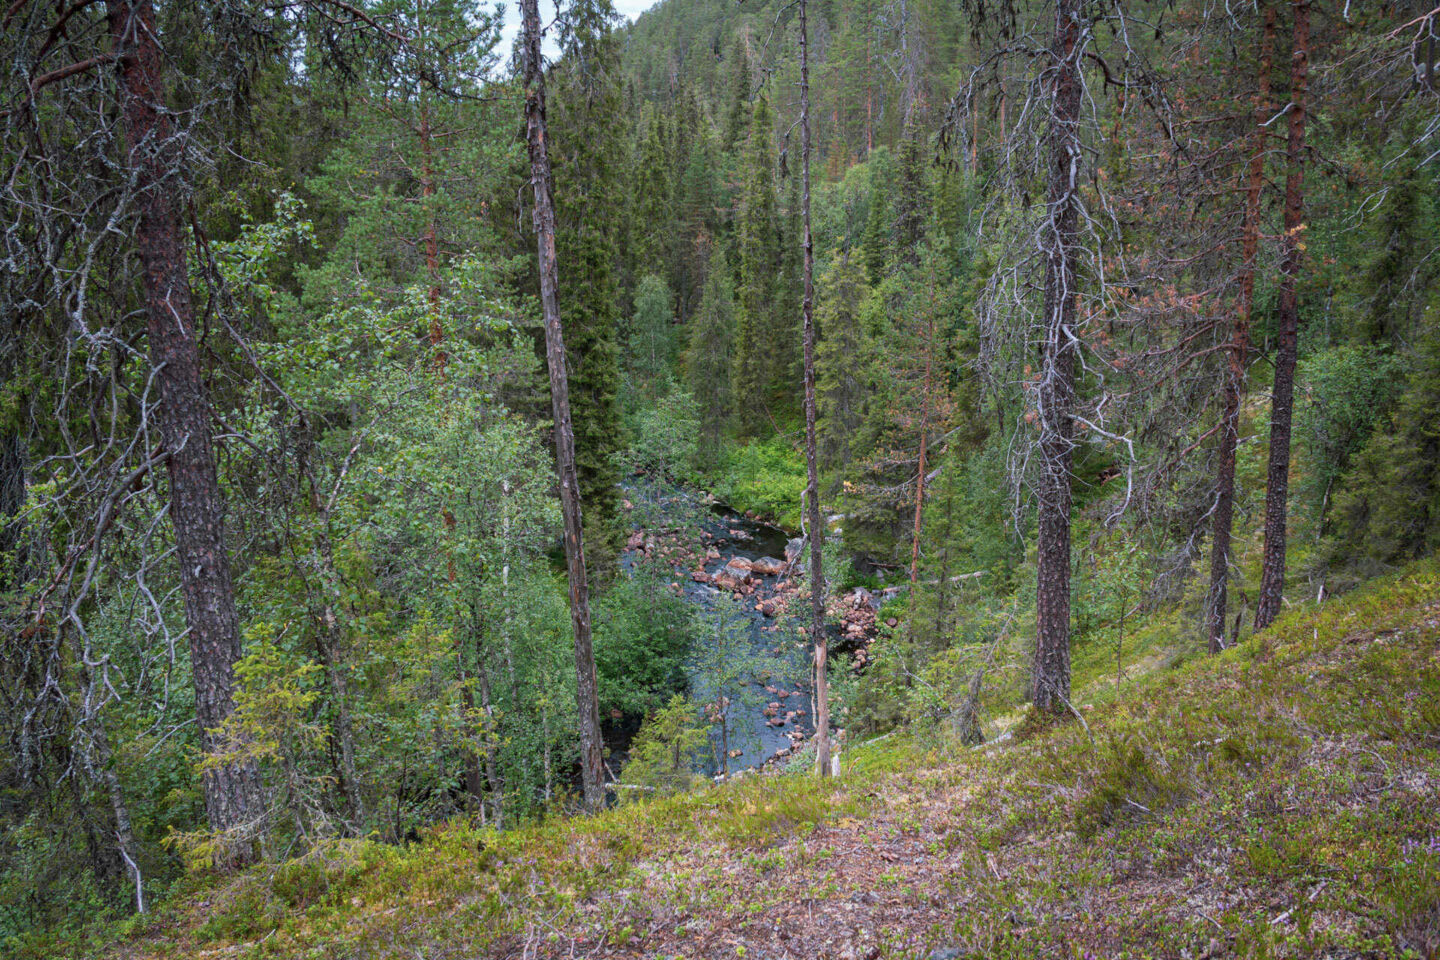 The river, forest and ravine at Salmijoki river in Salla, a Finnish Lapland filming location